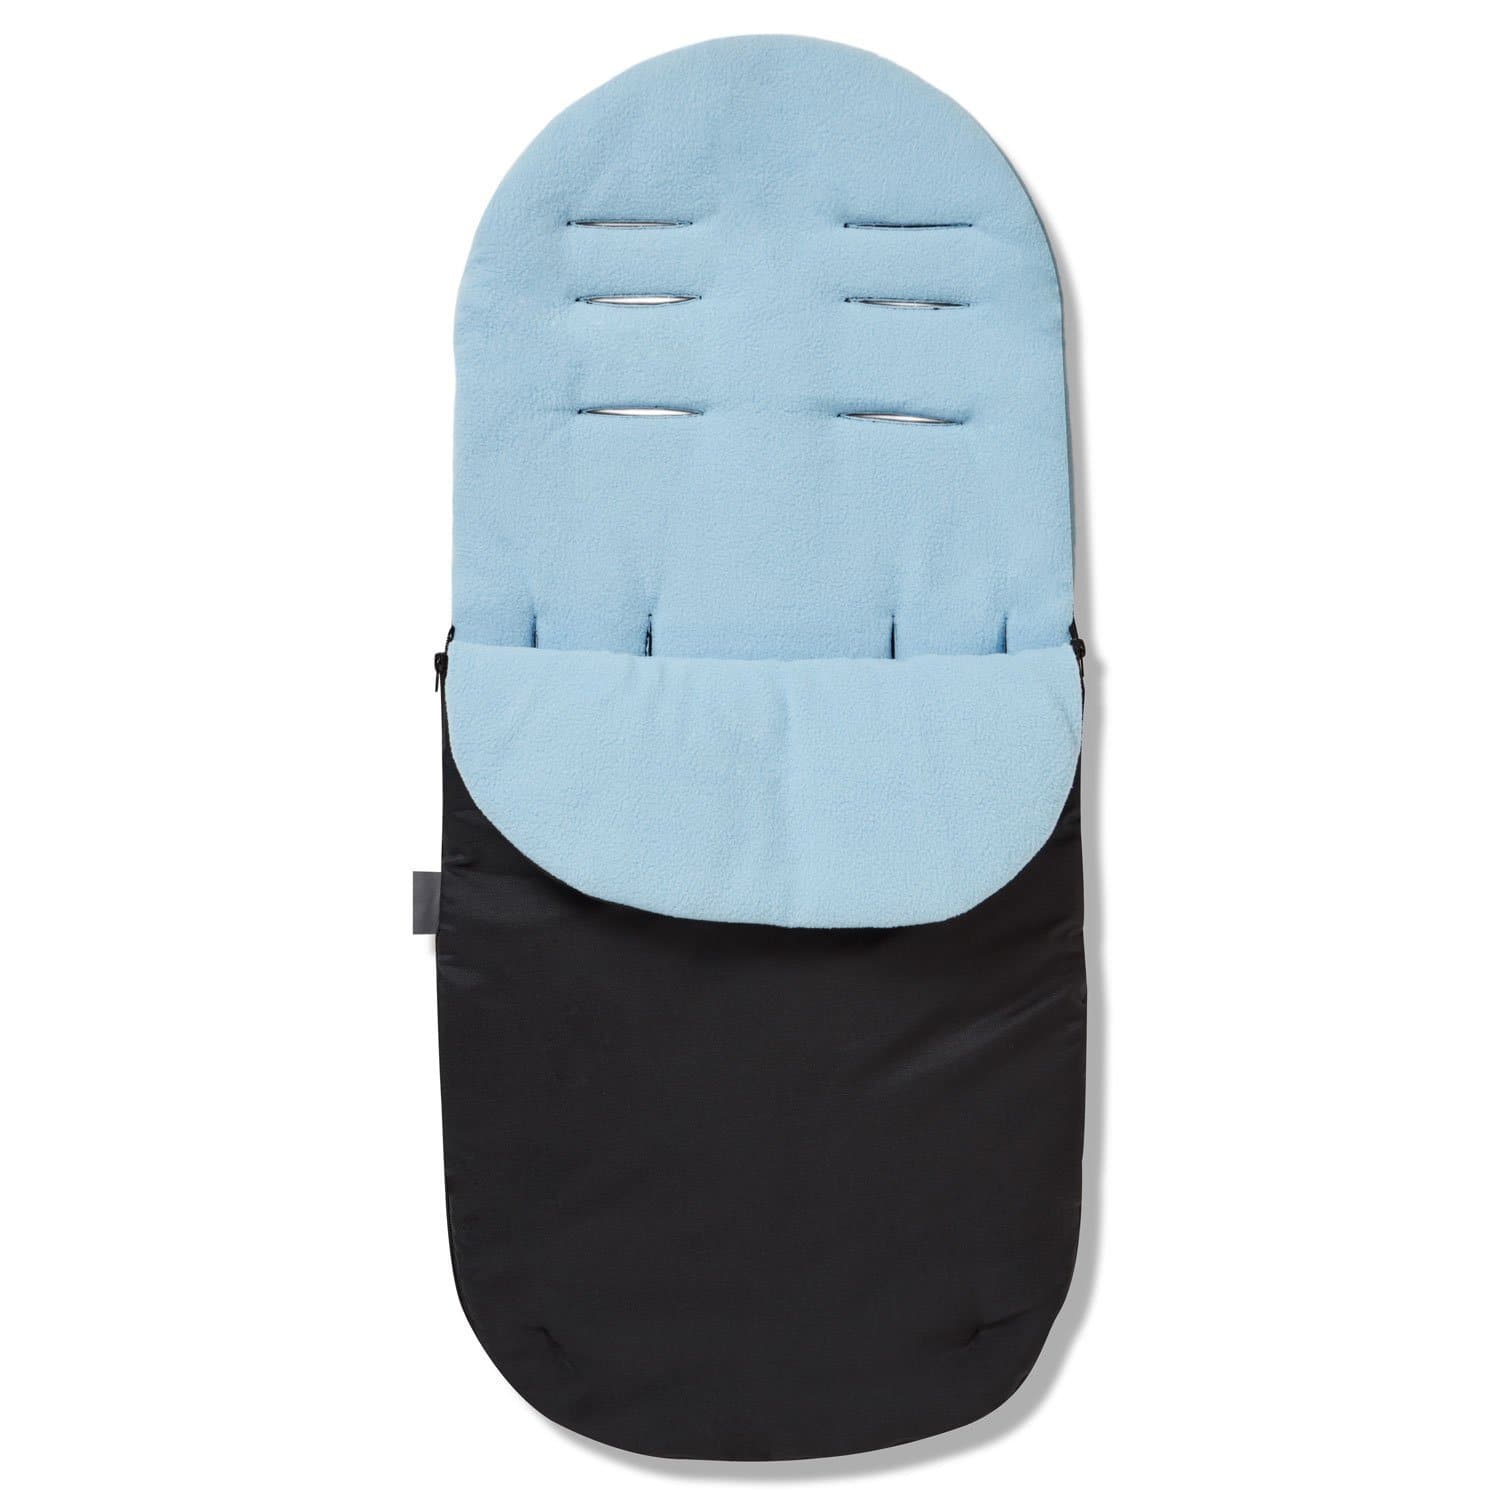 Footmuff / Cosy Toes Compatible with Joie - For Your Little One